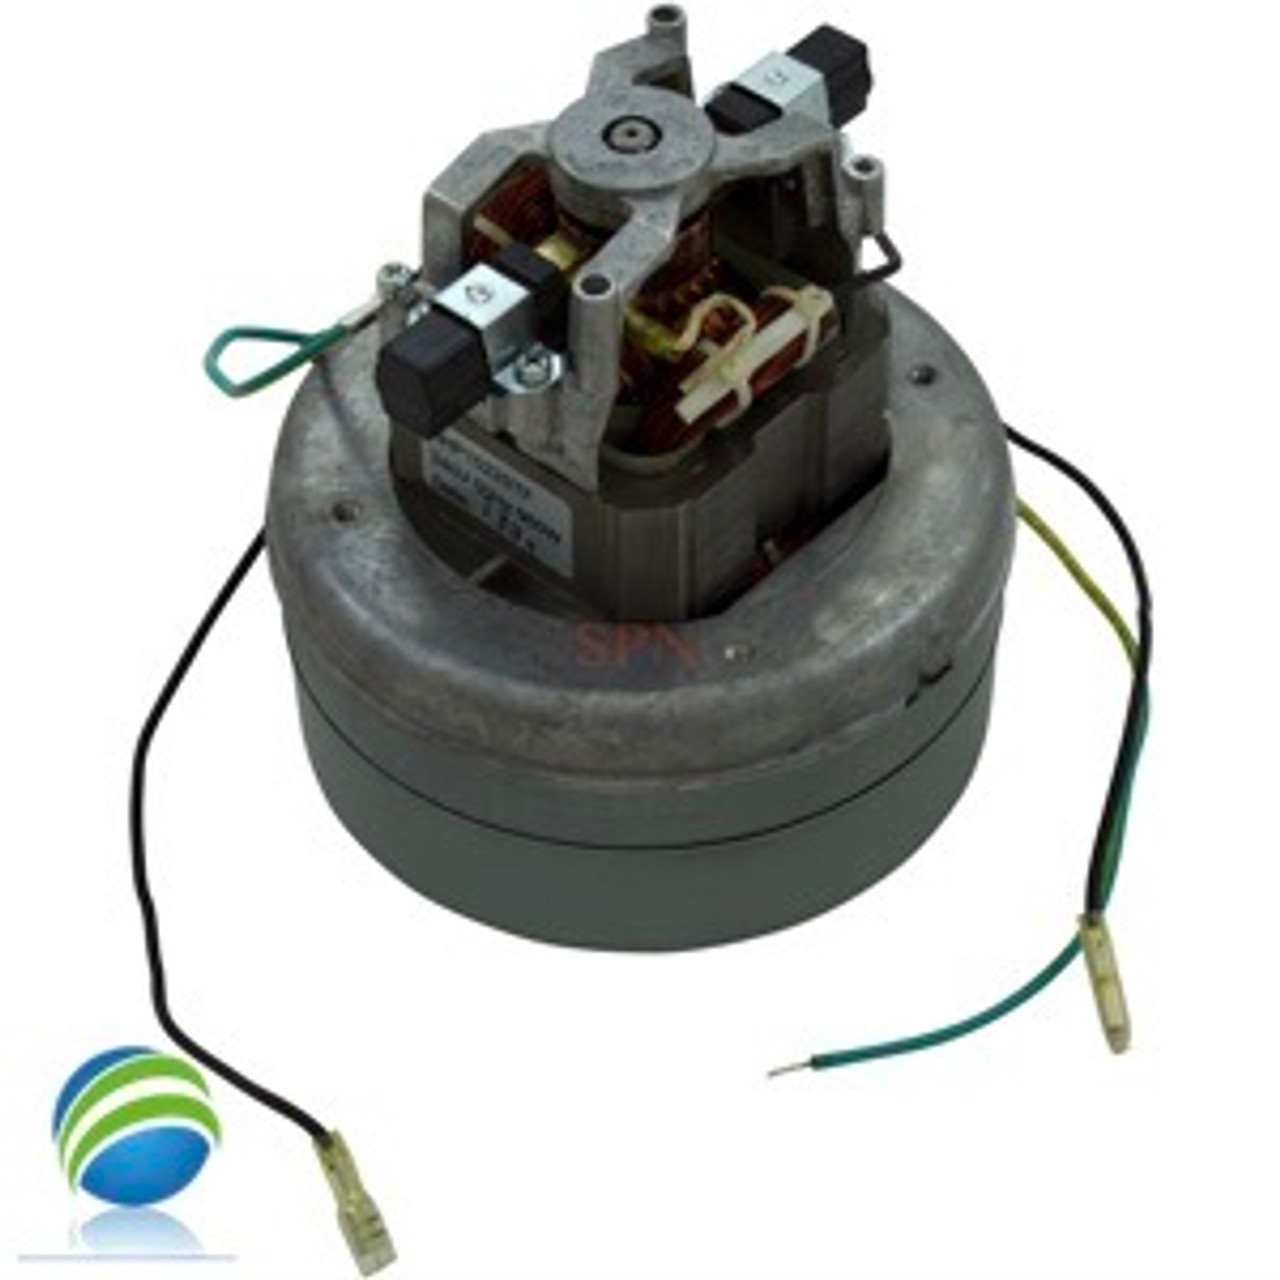 Motor, Ametek, Air Blower Replacement, 1.5hp, 230v, 4.0A
When choosing your blower motor you will need to measure the Width, Height and what Amperage and what Horse Power...The Height of the motor will give you a clue about the Horse Power... Note: Do not order a 115V in place of a 230 or Vice Versa you can damage the motor or the circuit. BE sure of all of these things before ordering.